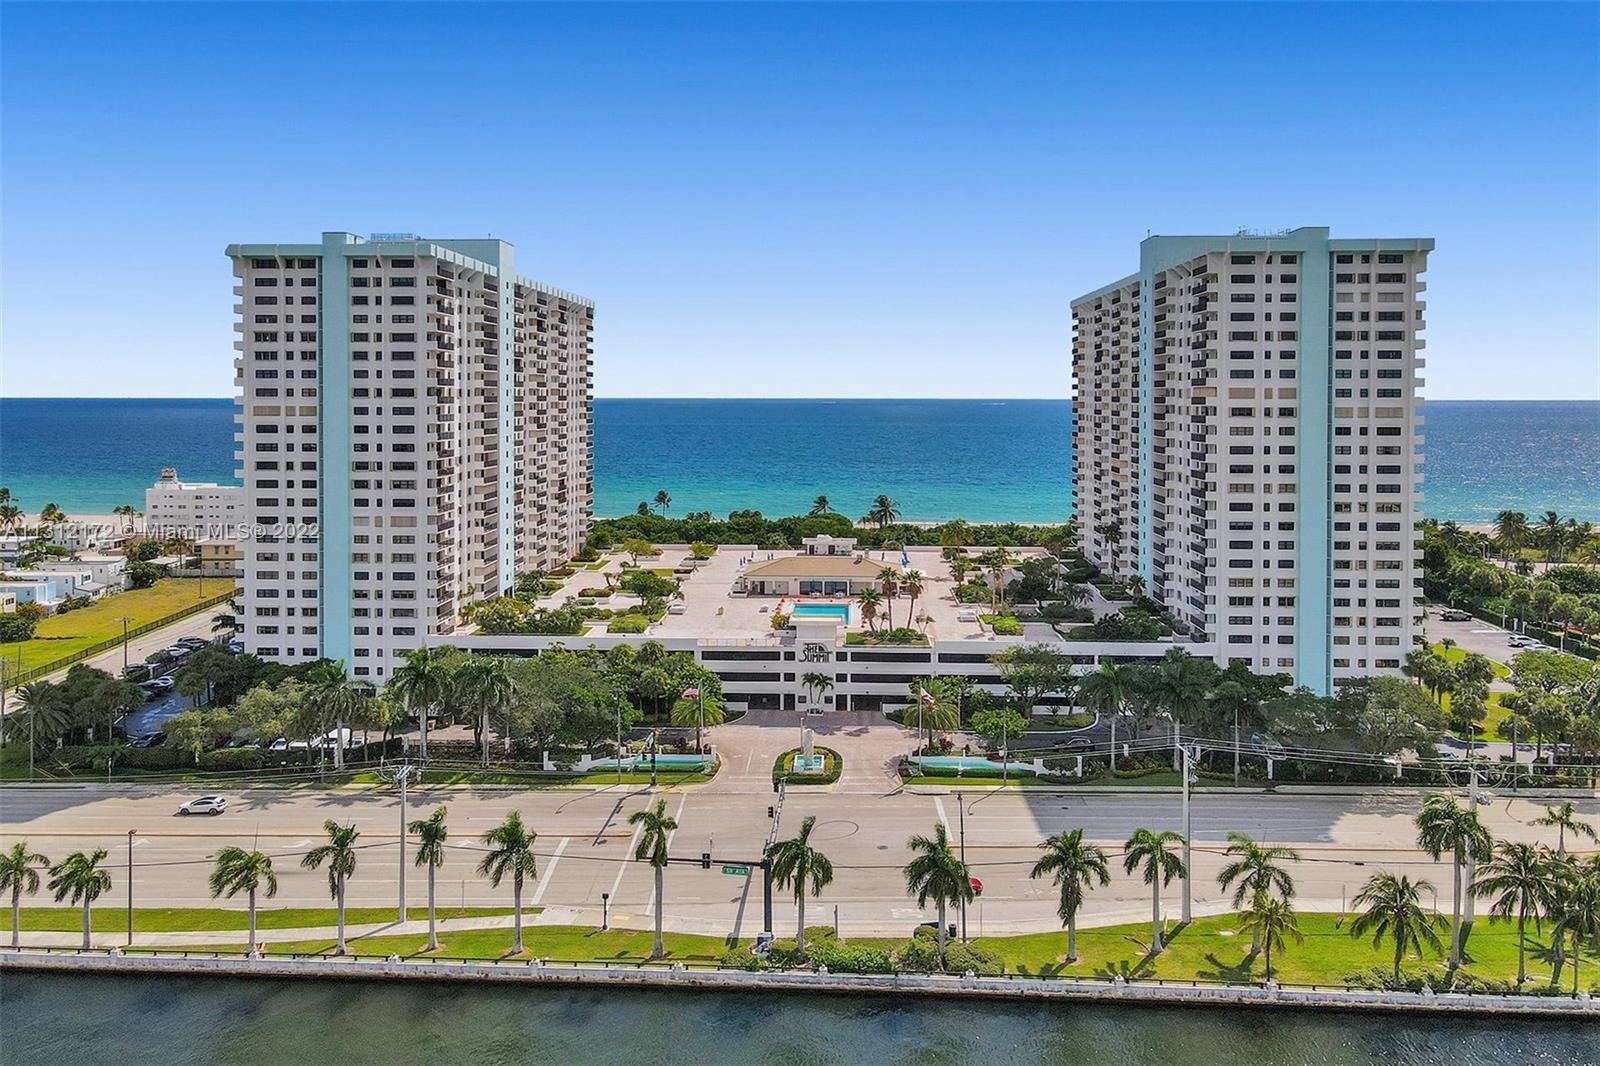 Location Location Location 1 Bedroom 1.5 baths, 1200sq ft on Hollywood Beach.  Nestled between the A